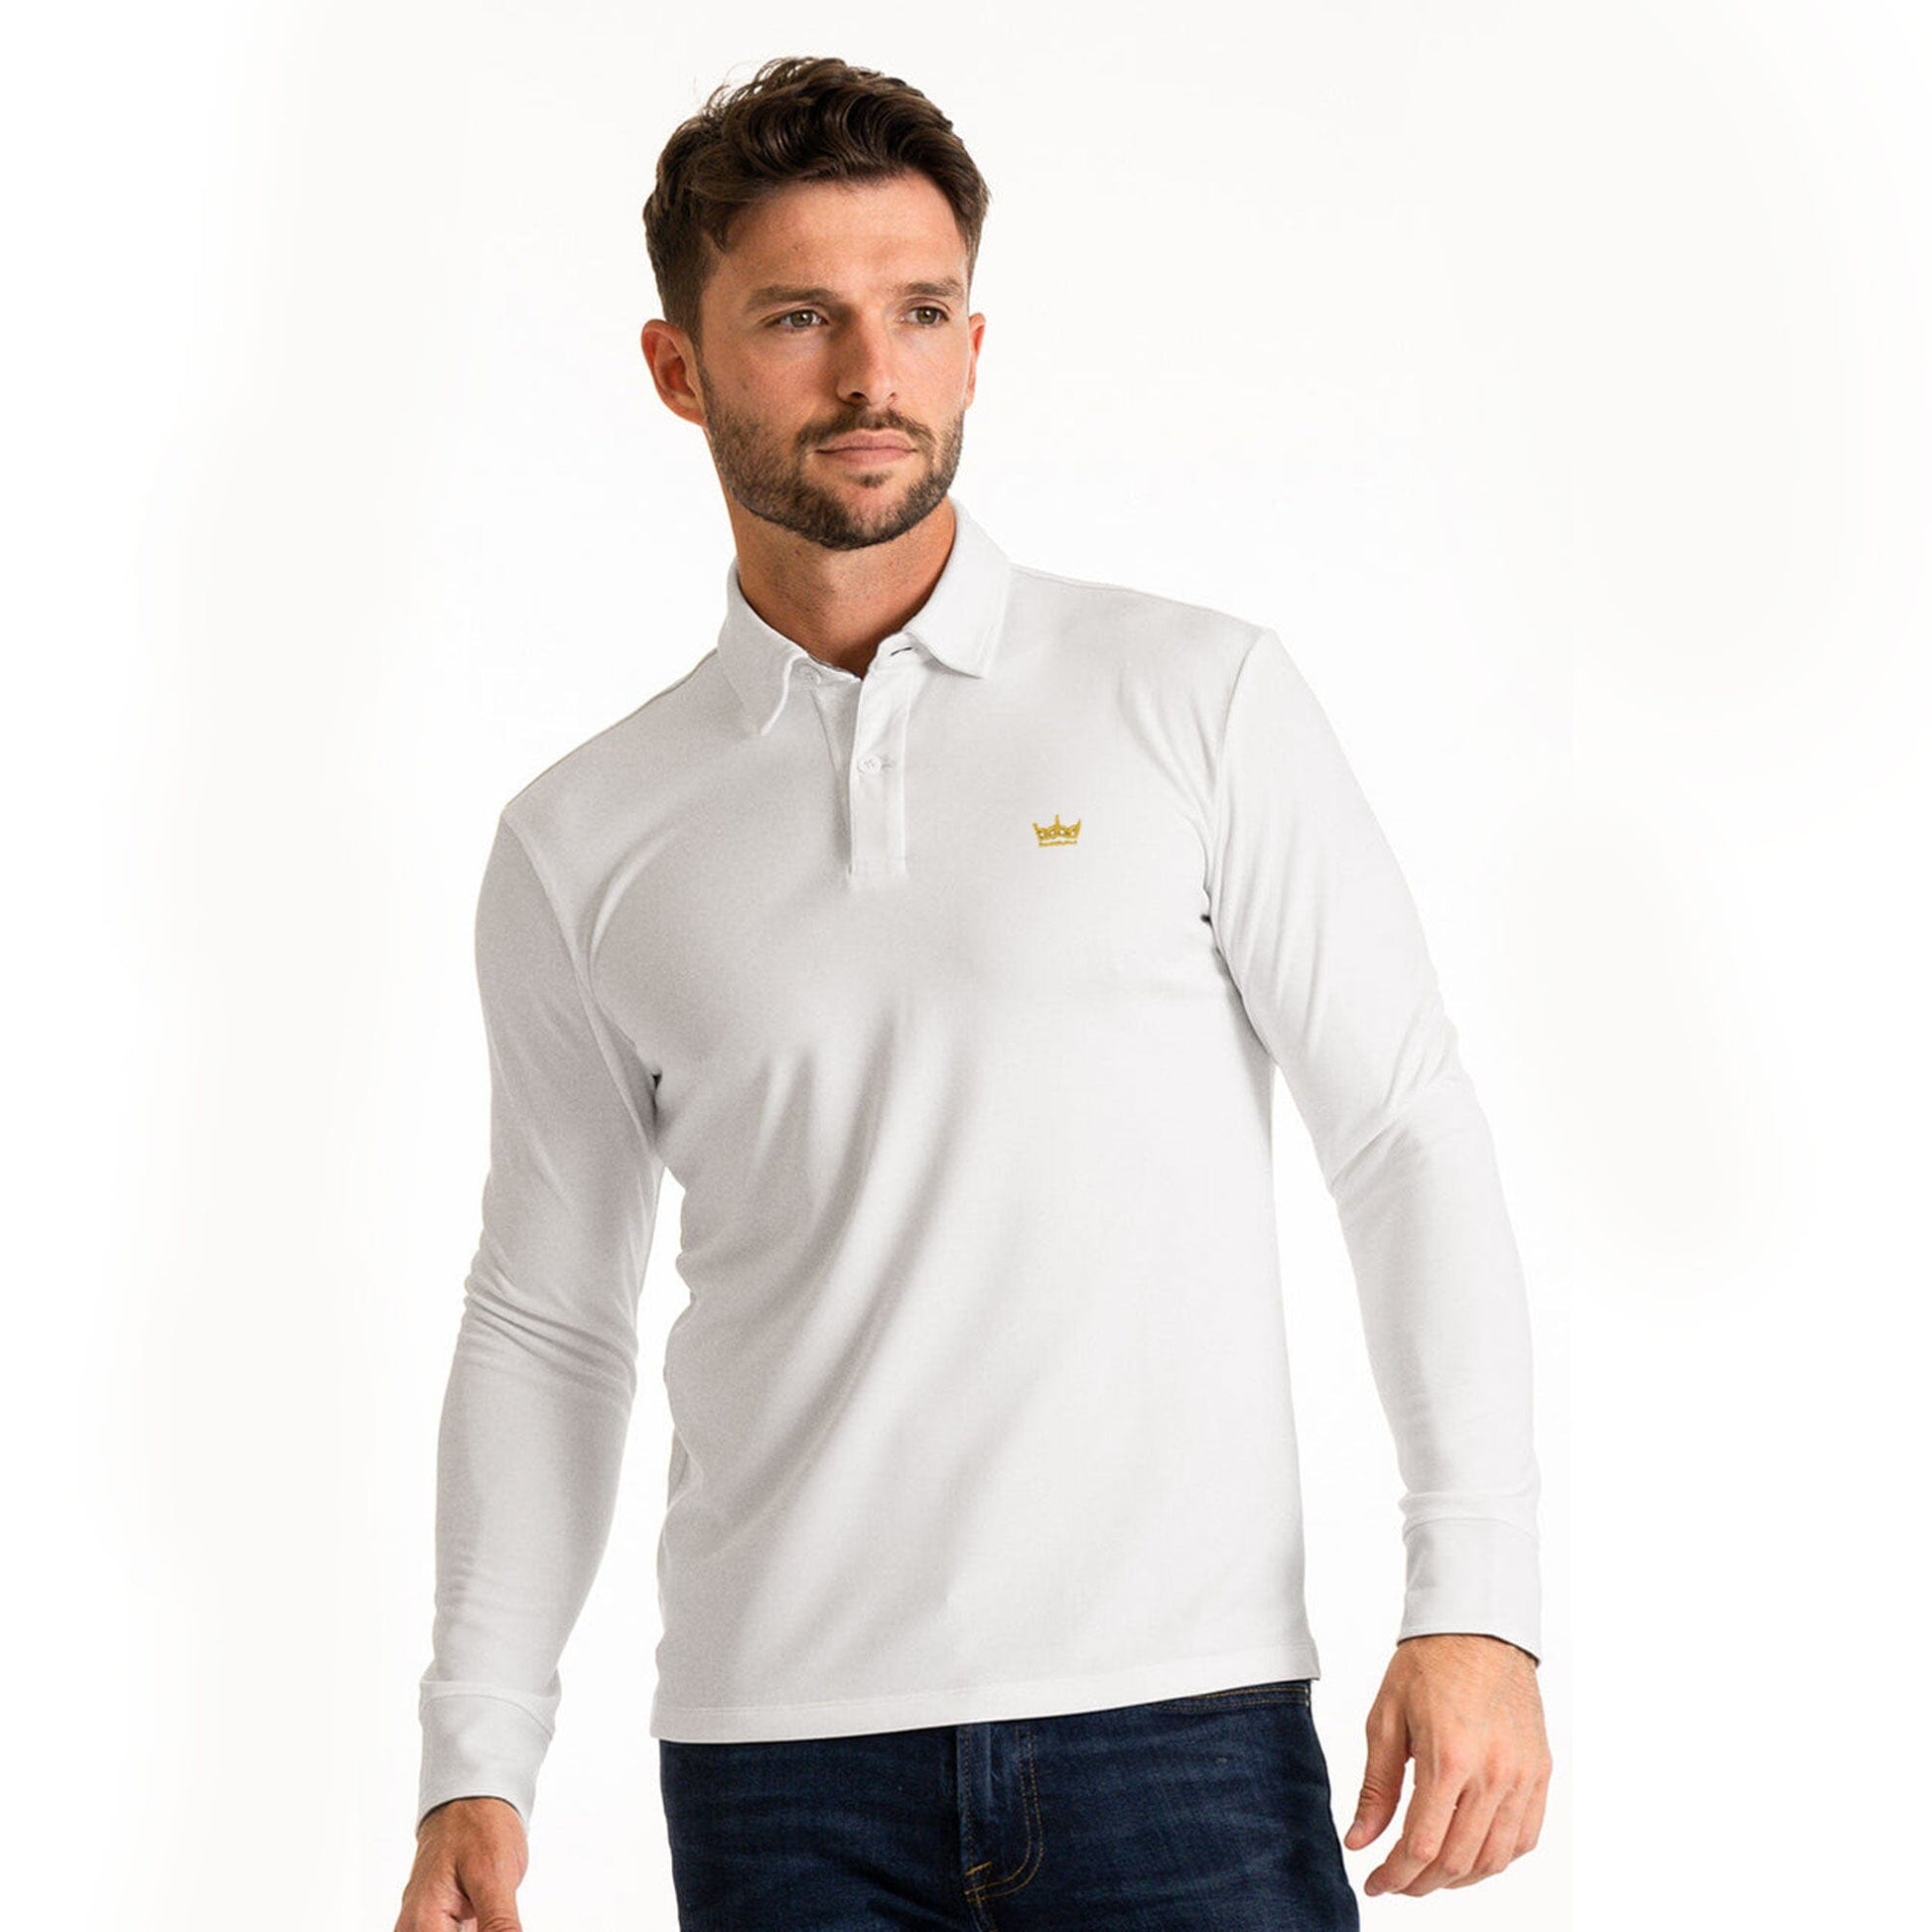 Industrialize Men's Crown Embroidered Minor Fault Long Sleeve Polo Shirt Men's Polo Shirt IST White 2XS 